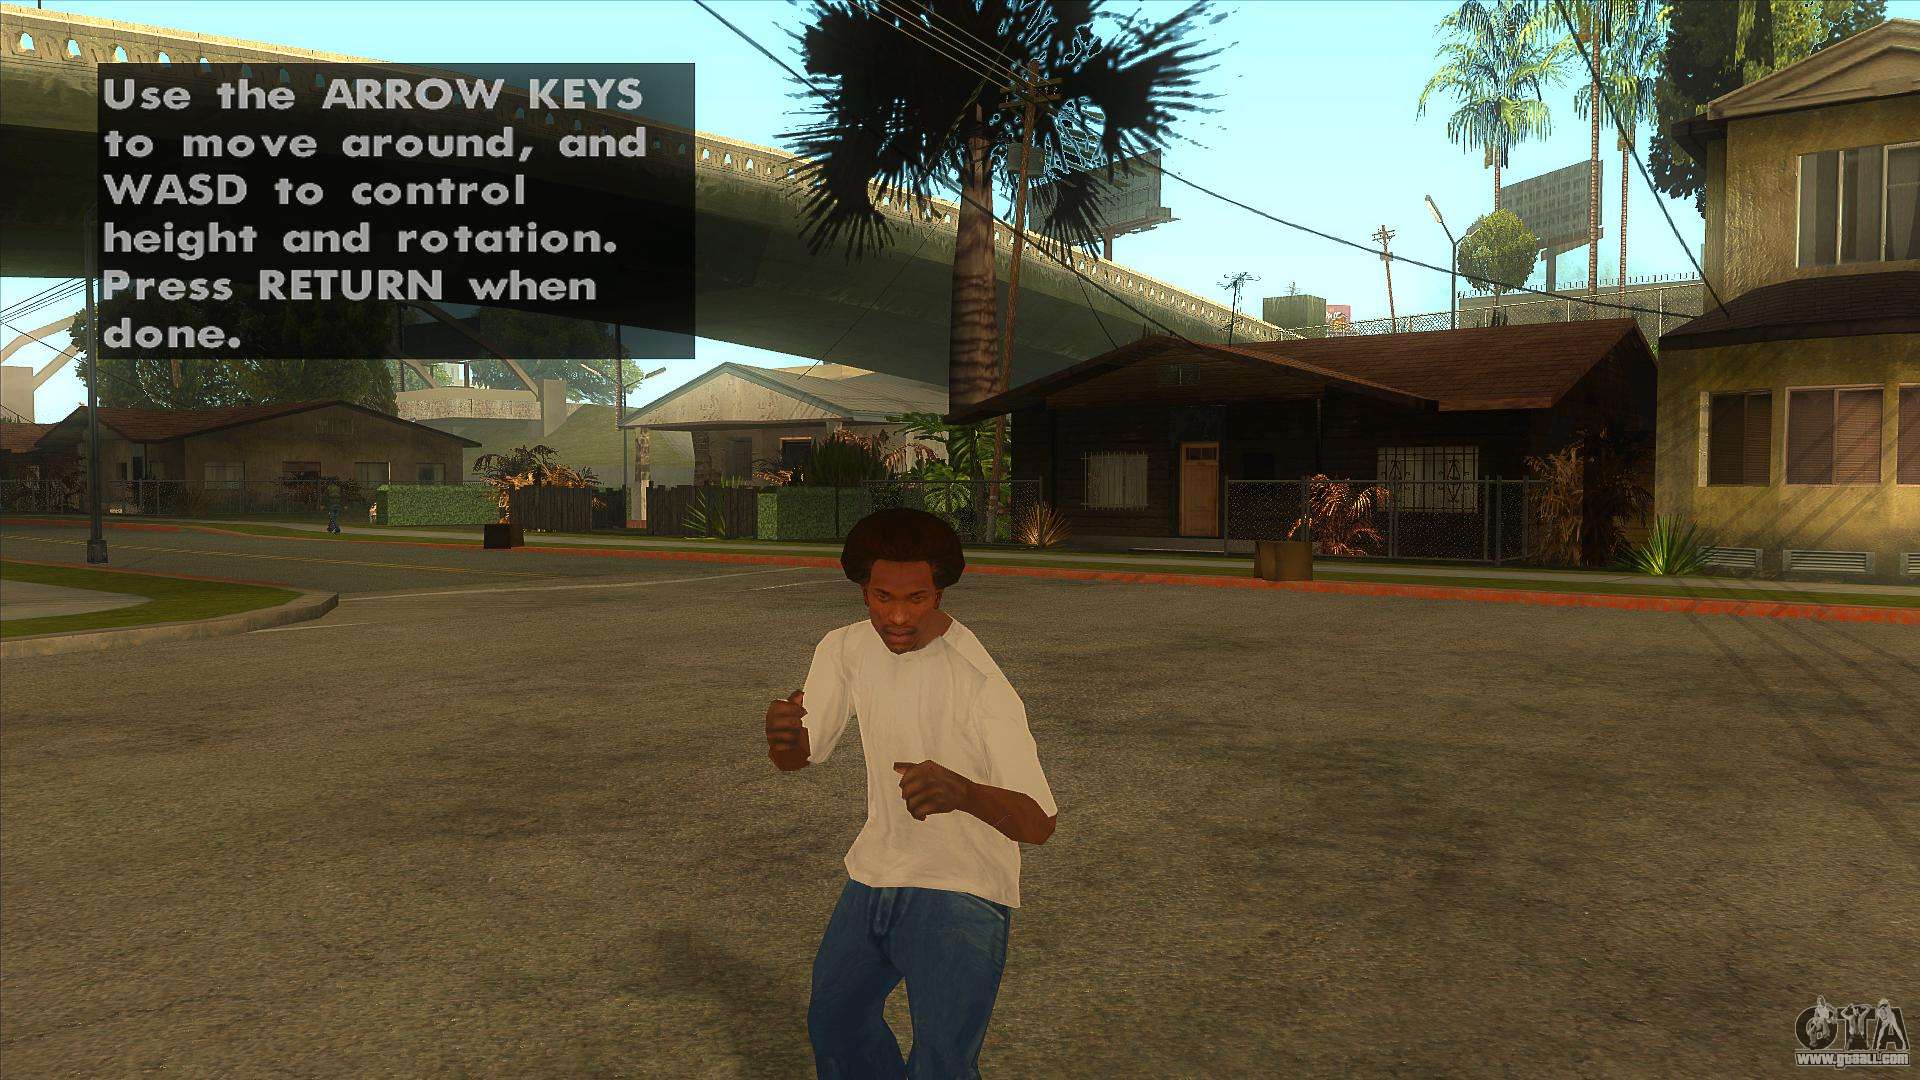 Download Stop time for GTA San Andreas